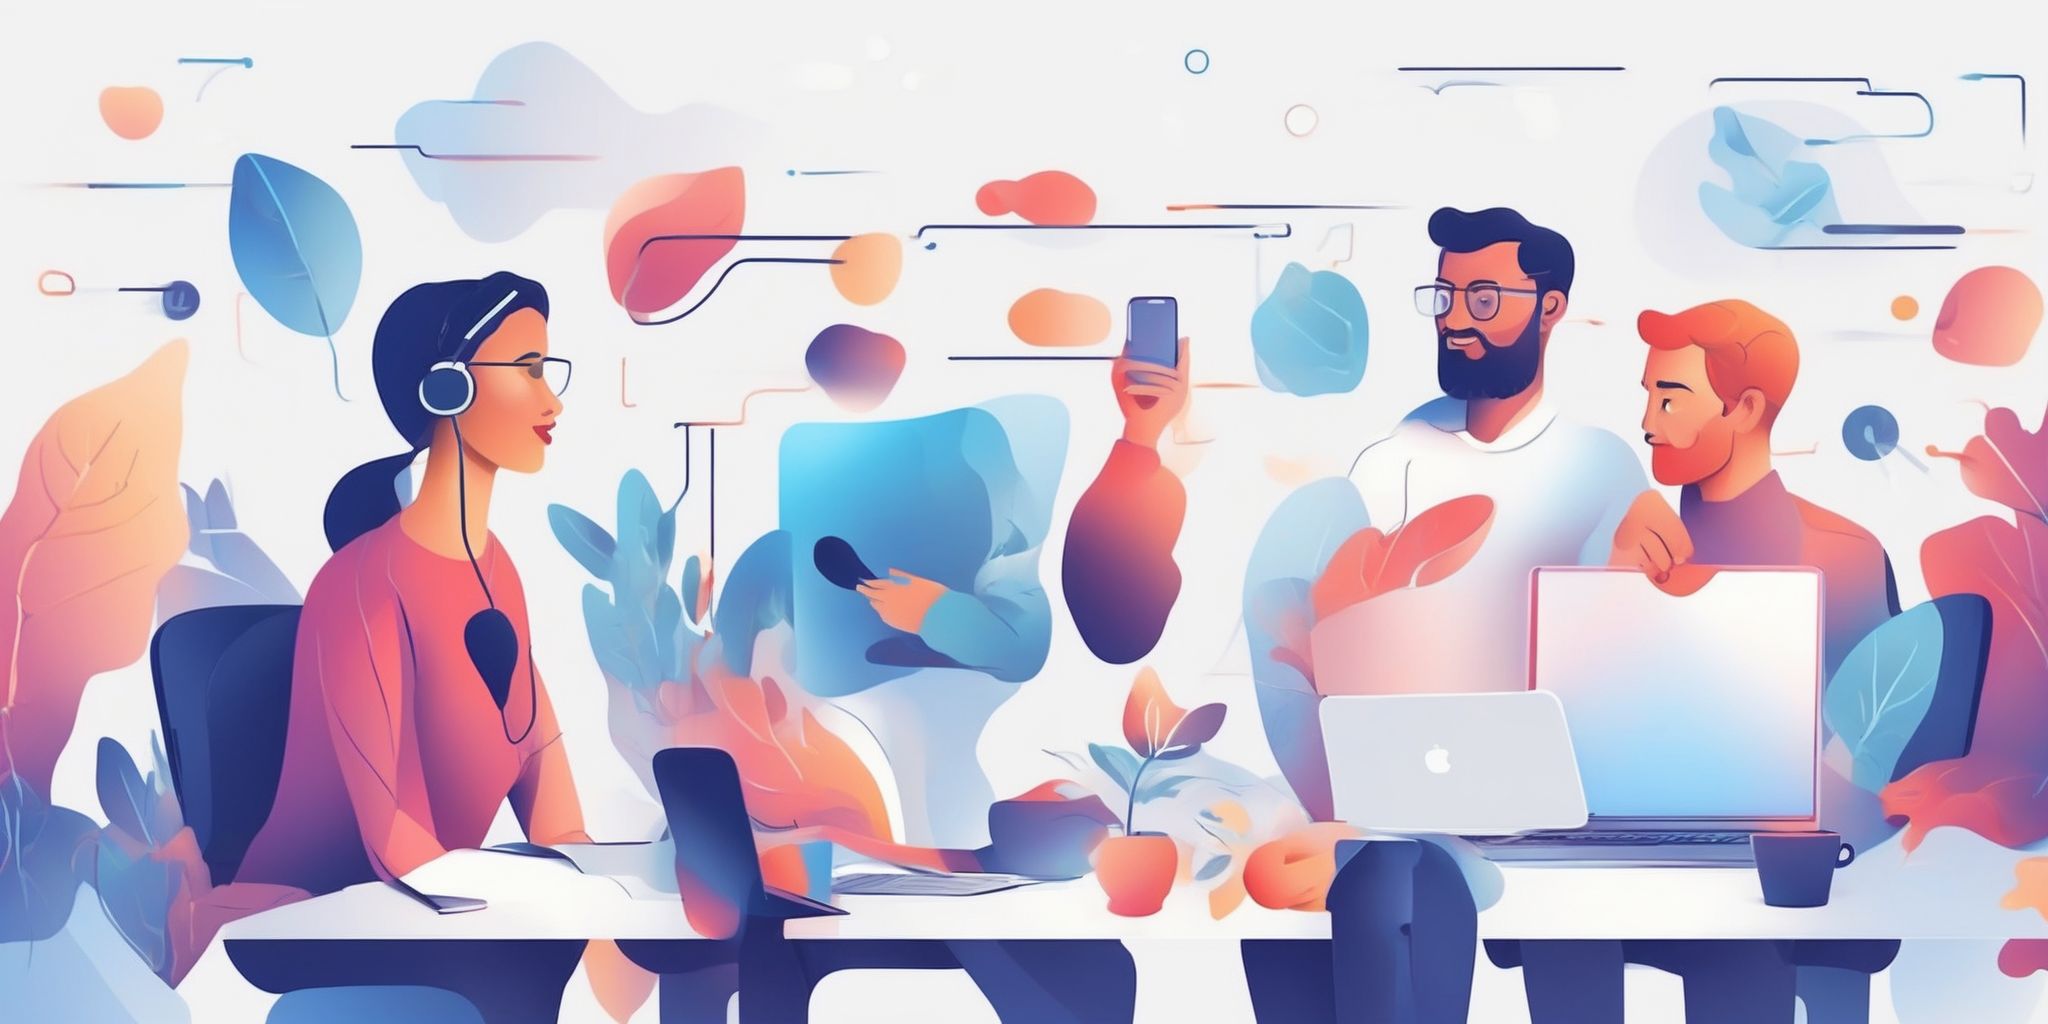 Online conferences in illustration style with gradients and white background